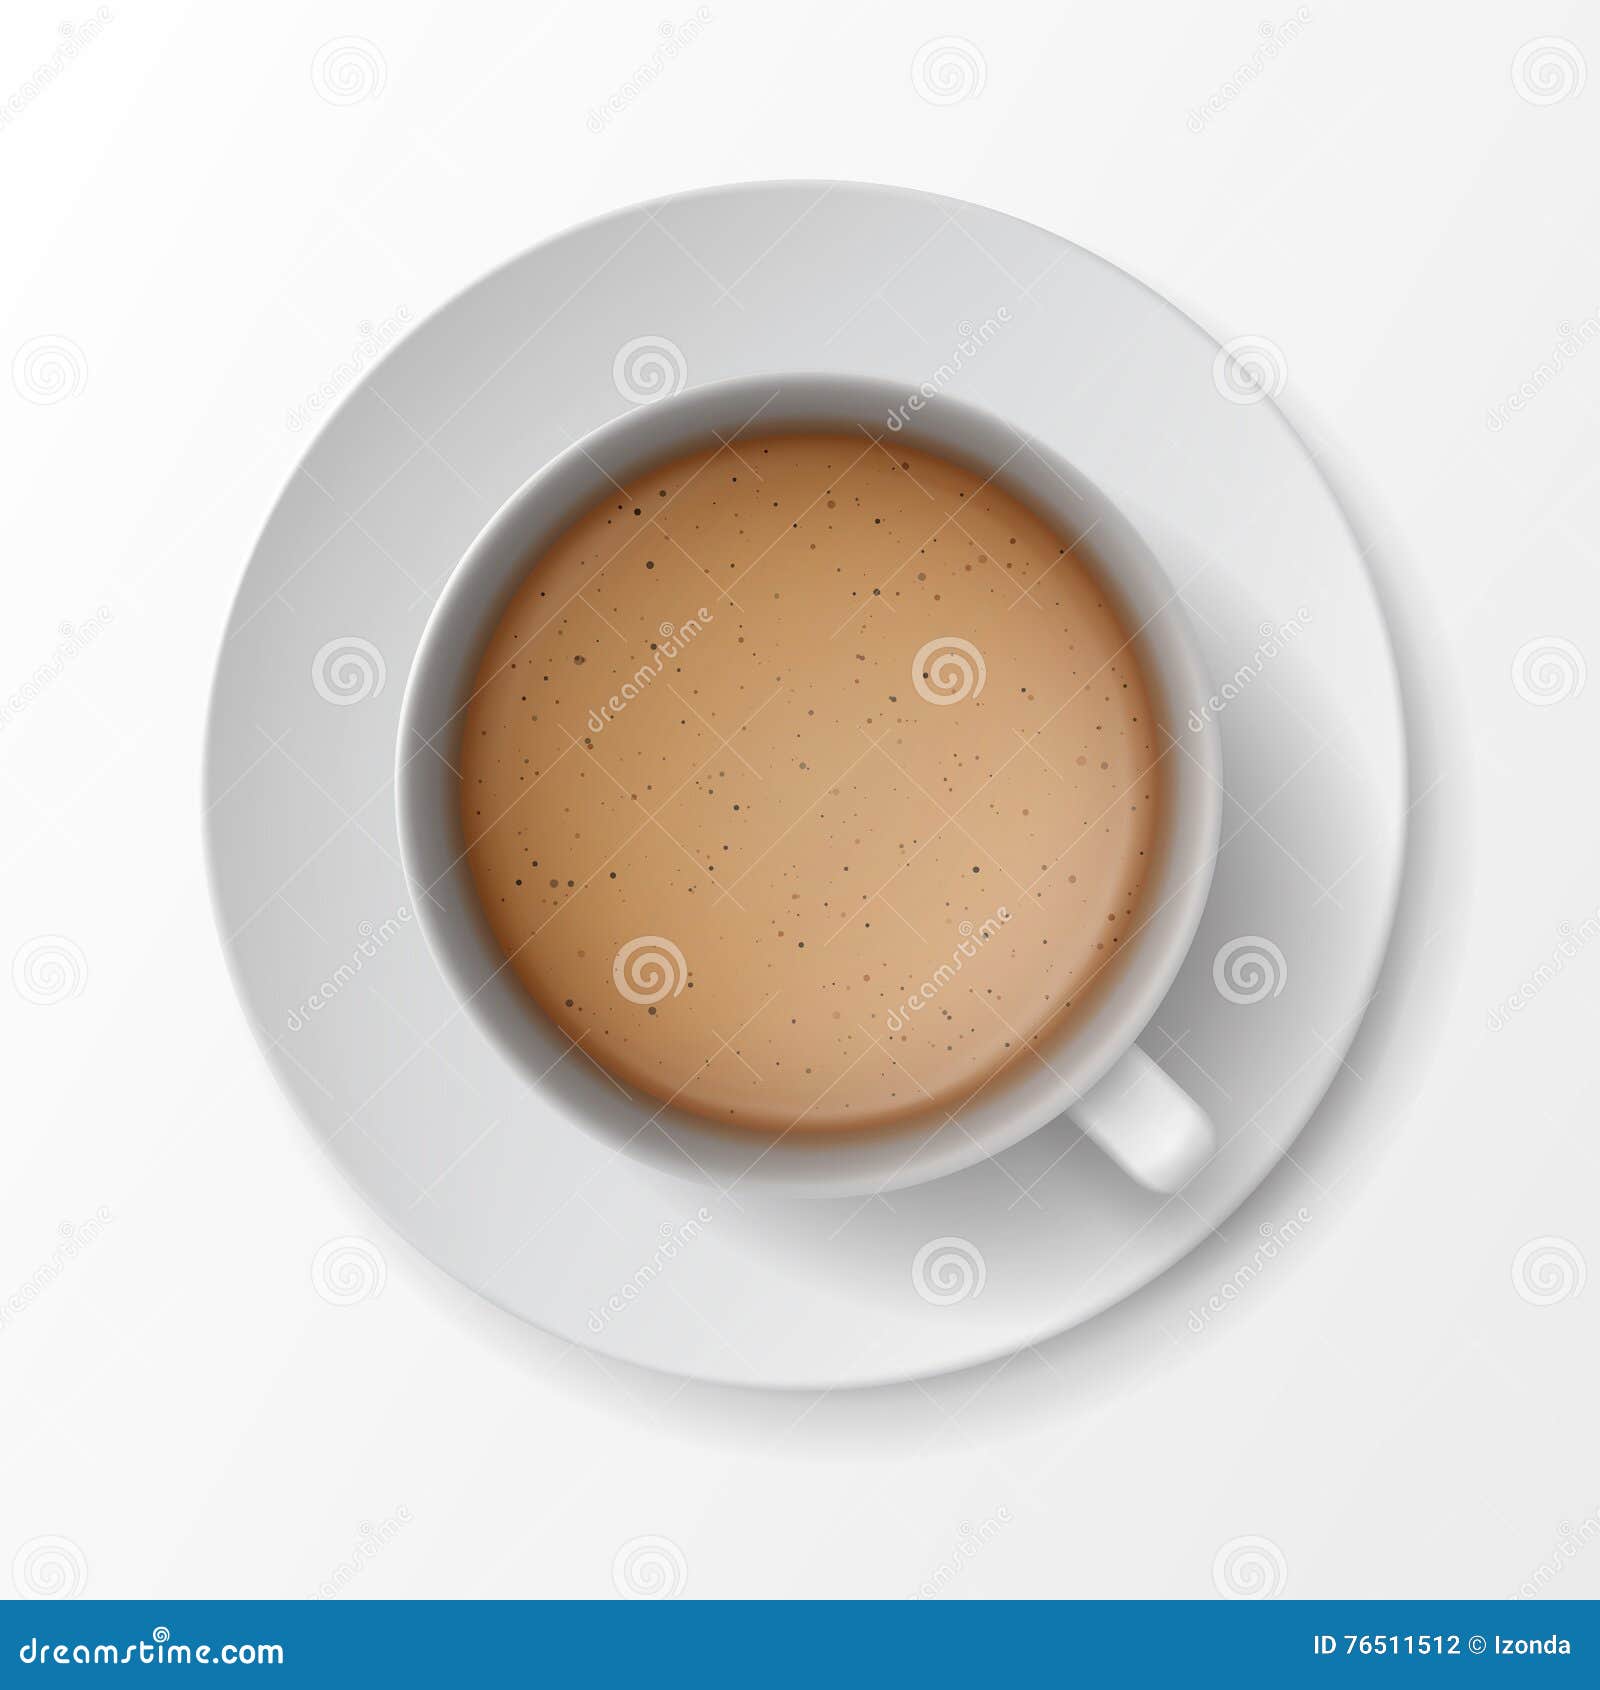  coffee cup mug with crema foam bubbles on background